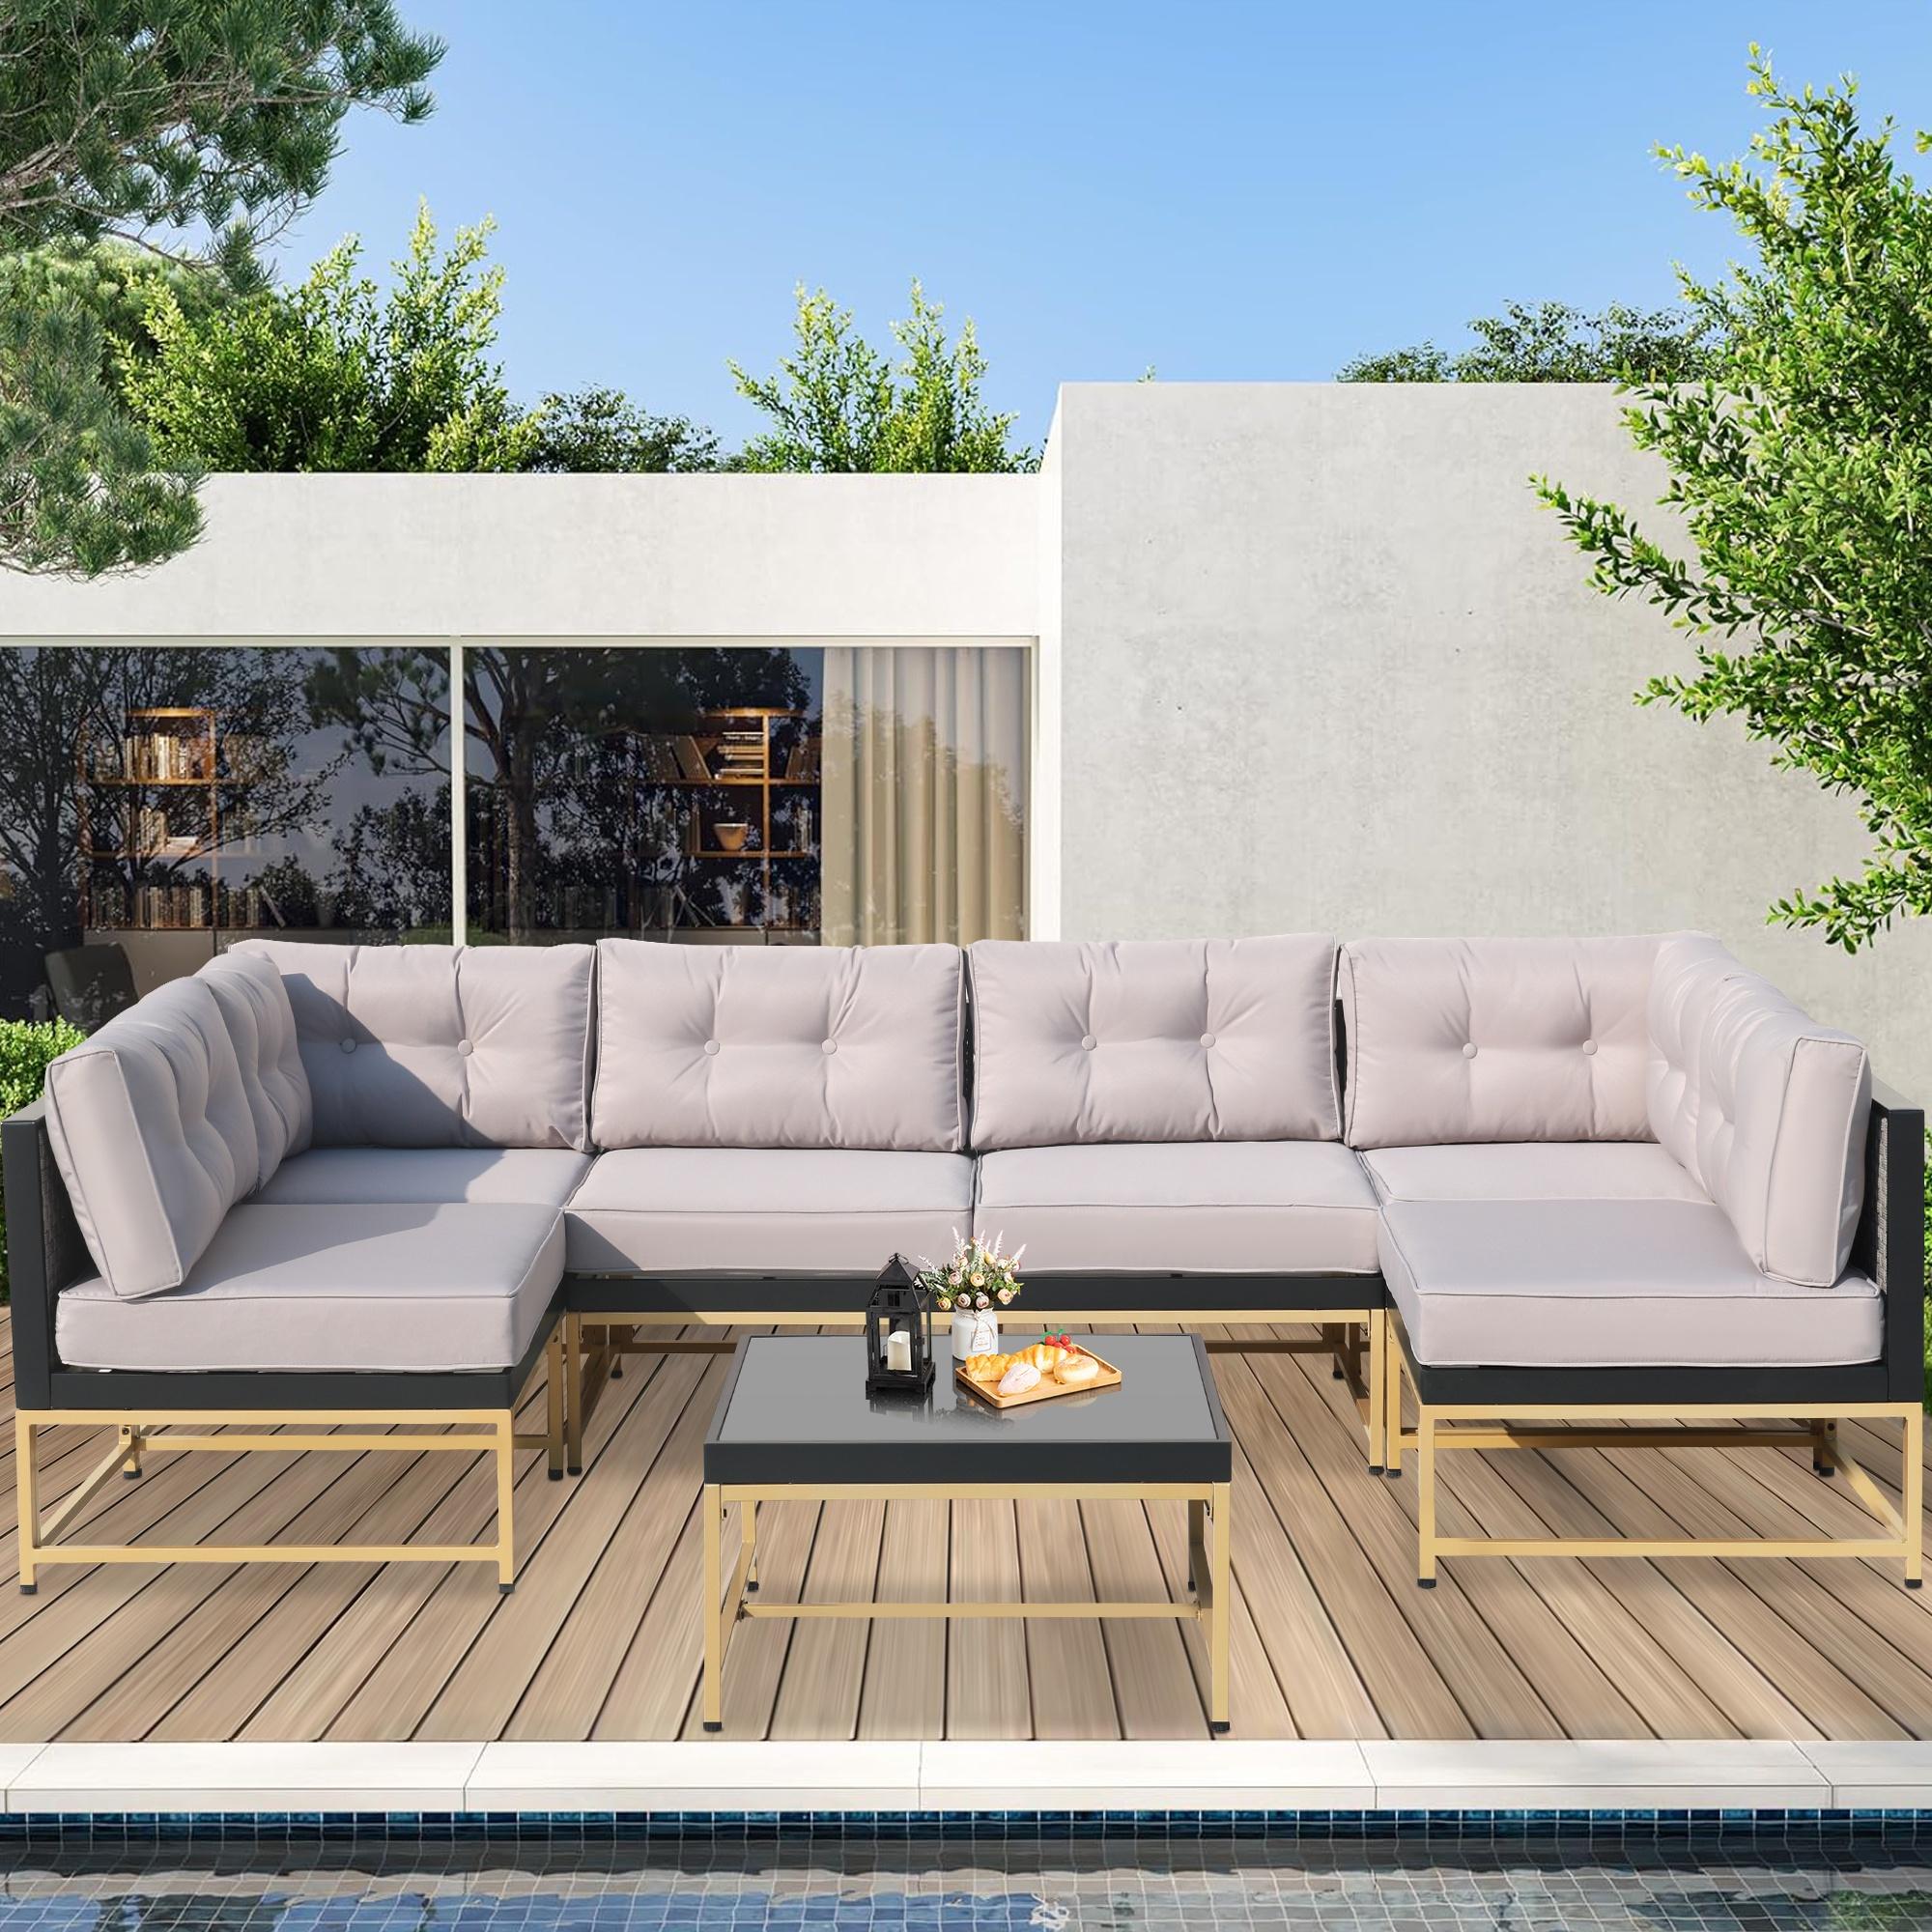 Patio Outdoor Furniture Sets, 7 Pieces All-Weather Rattan Sectional Sofa with Tea Table and Cushions, PE Rattan Wicker Sofa Couch Conversation Set for Garden Backyard Poolside - image 1 of 11